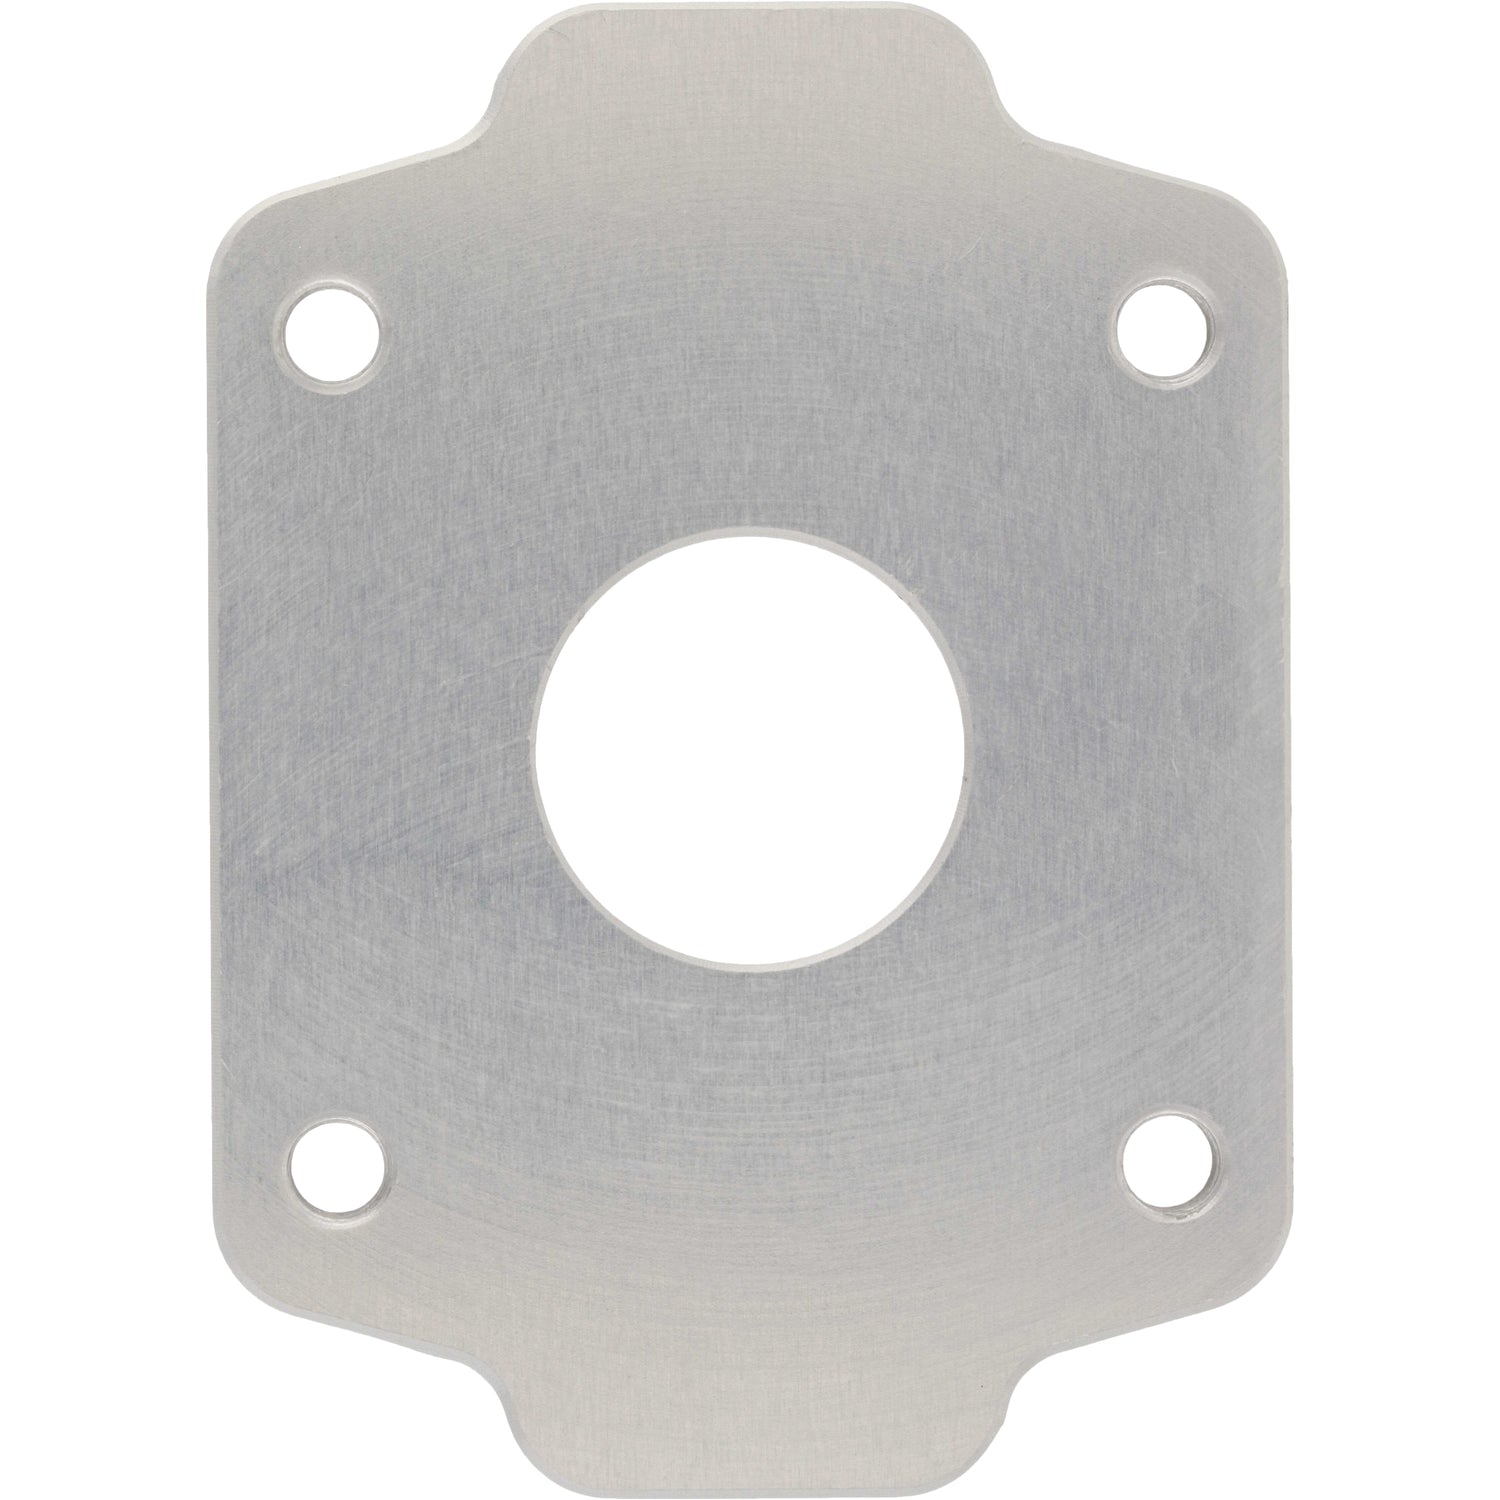 Machined aluminum plate with one larger center hole and four smaller threaded holes on each corner. Part shown on white background. 